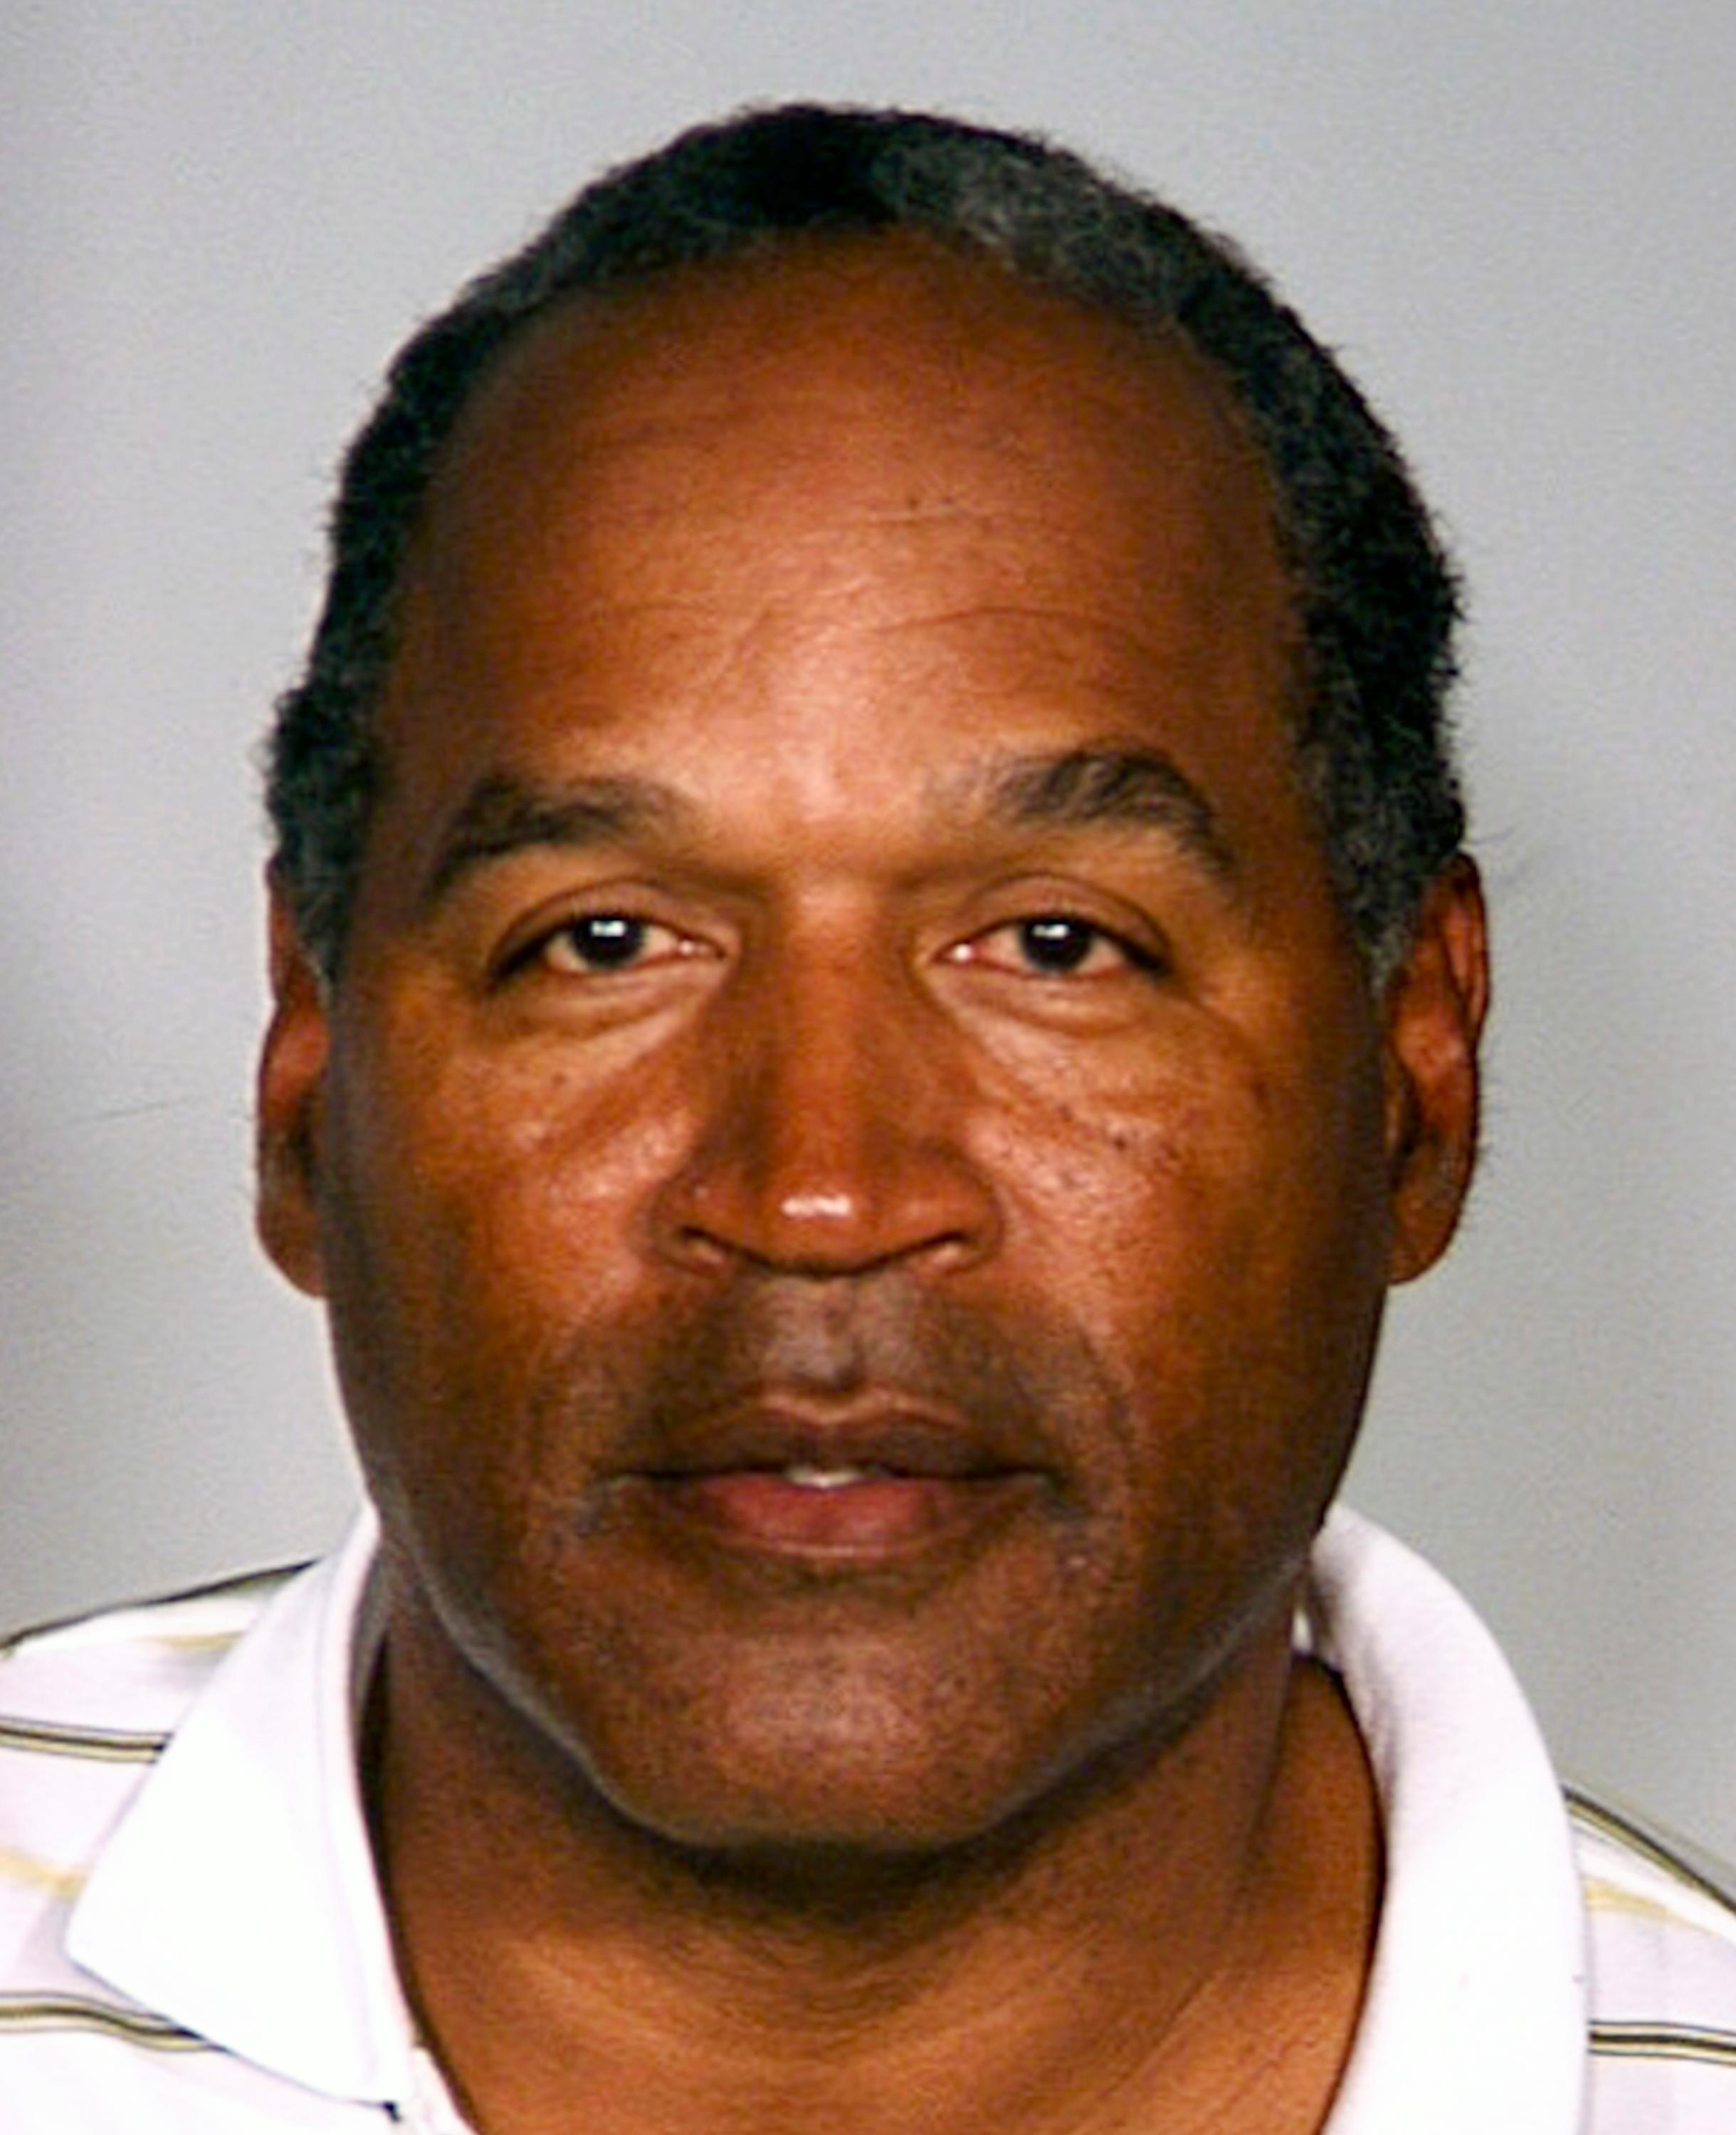 O.J Simpson Sent a Weird Message to the Kardashian Sisters: What Was It?